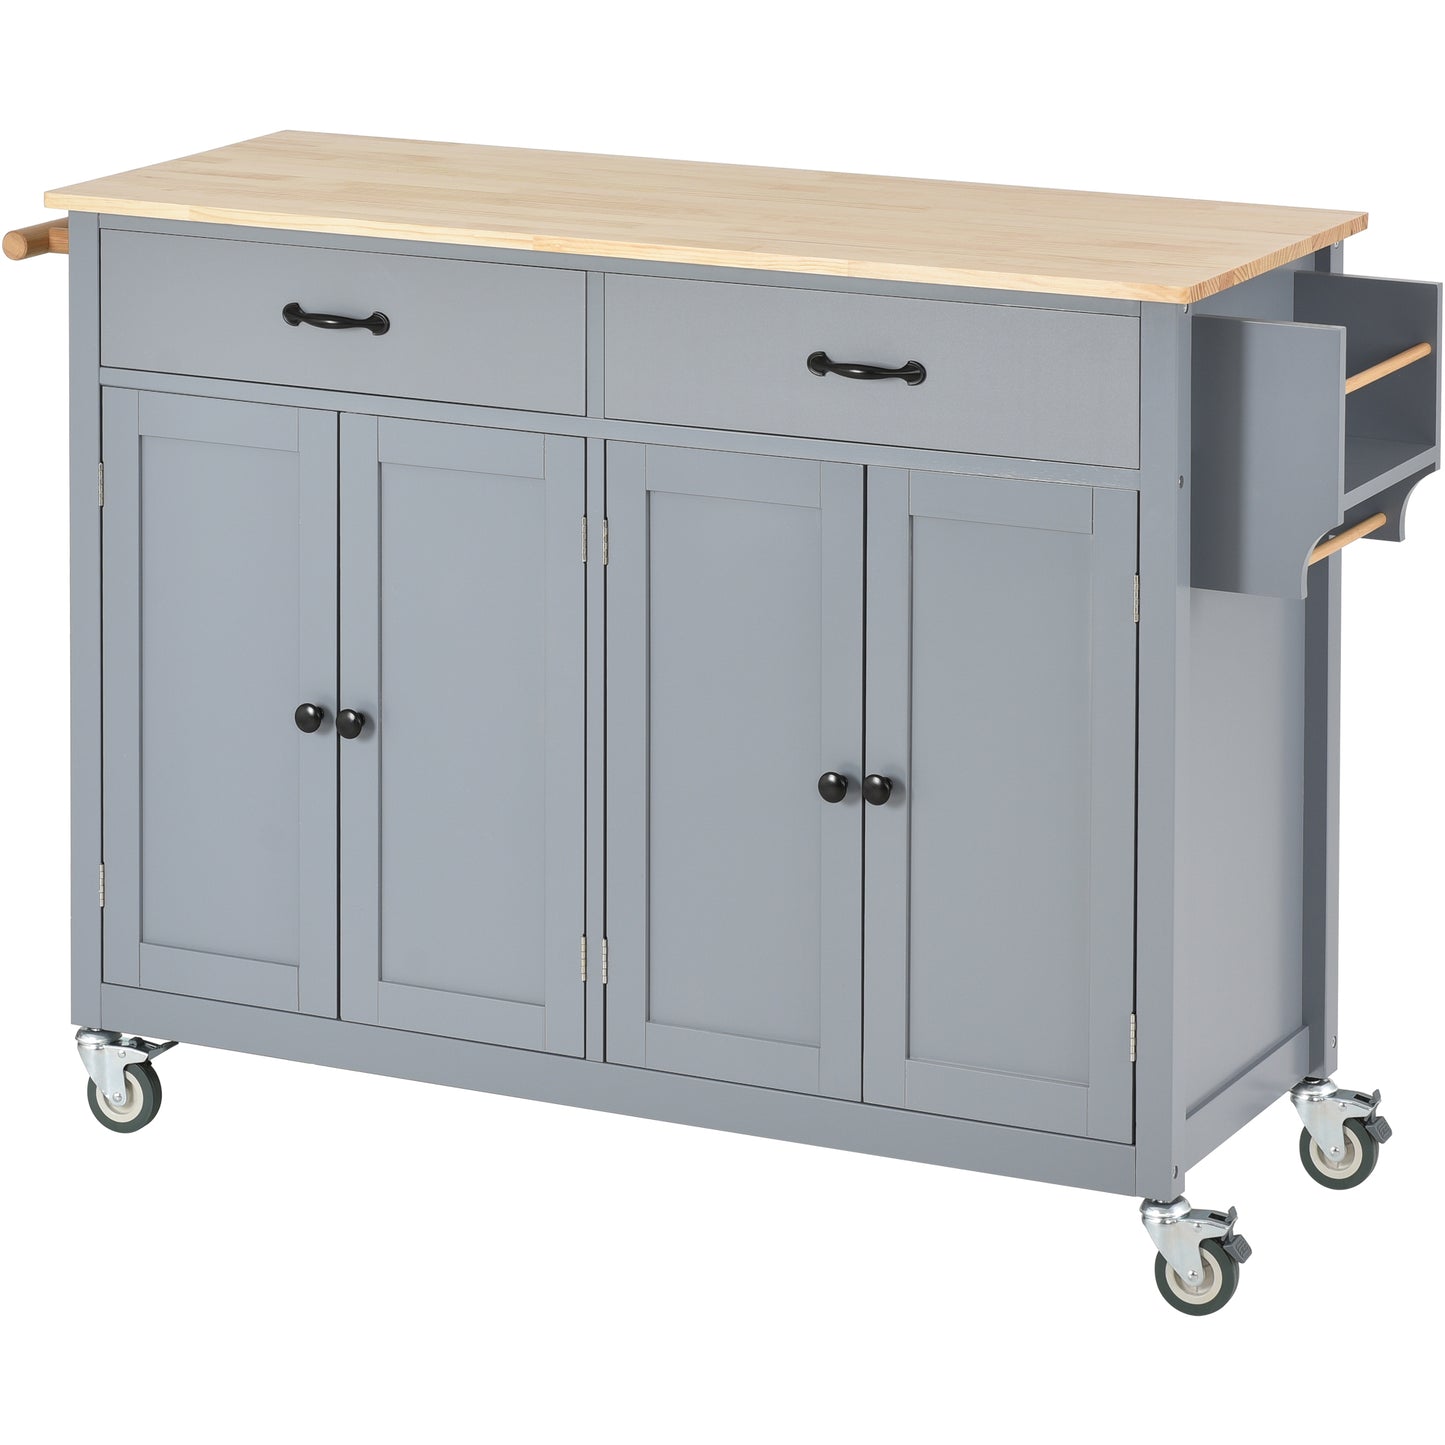 Kitchen Island Cart with Solid Wood Top and Locking Wheels,54.3 Inch Width,4 Door Cabinet and Two Drawers,Spice Rack, Towel Rack (Grey Blue)